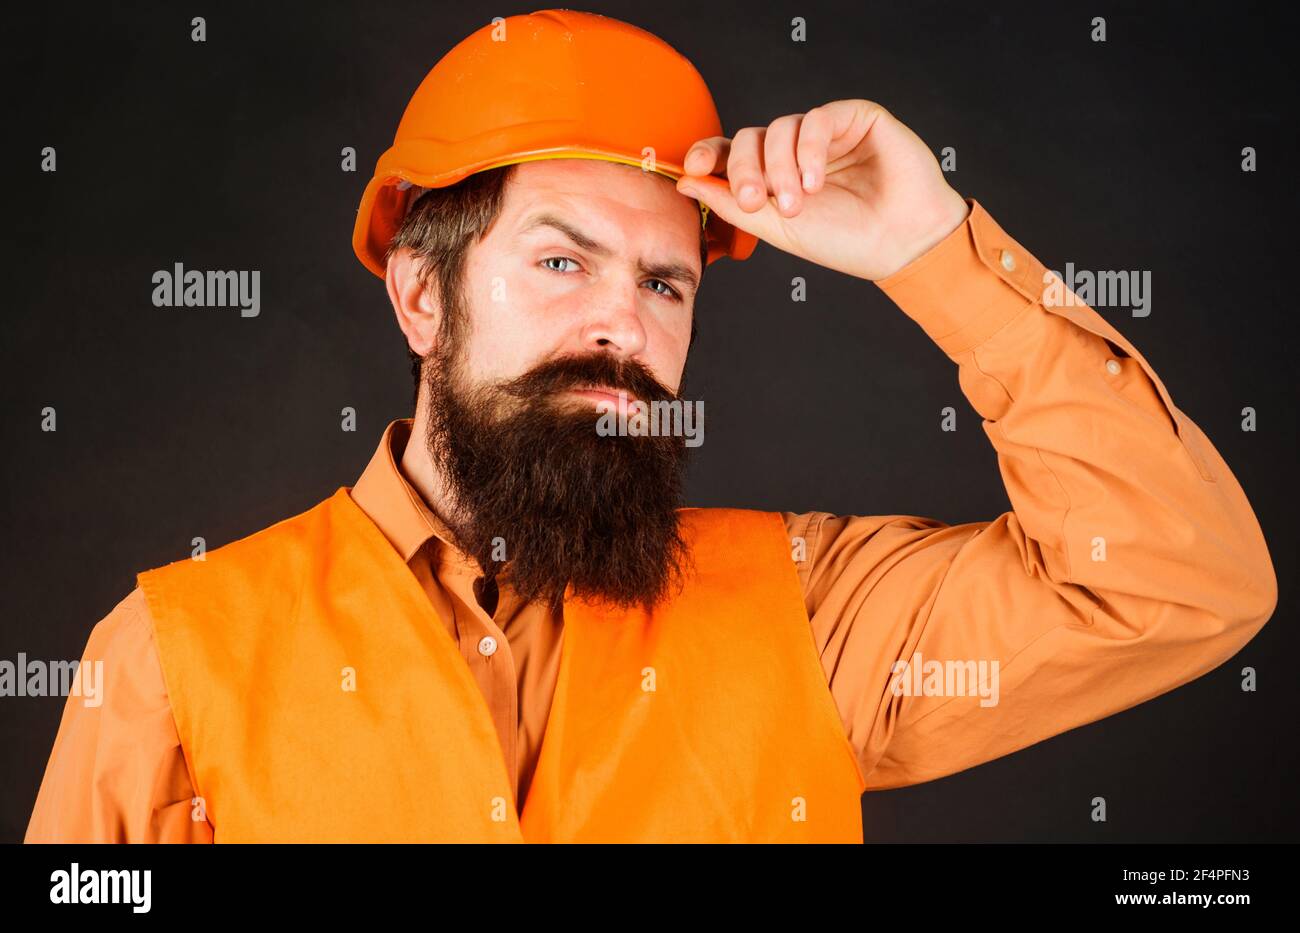 Professional Heavy Industry Engineer. Construction worker in hard hat. Bearded man in Safety Uniform and helmet. Male builder. Stock Photo